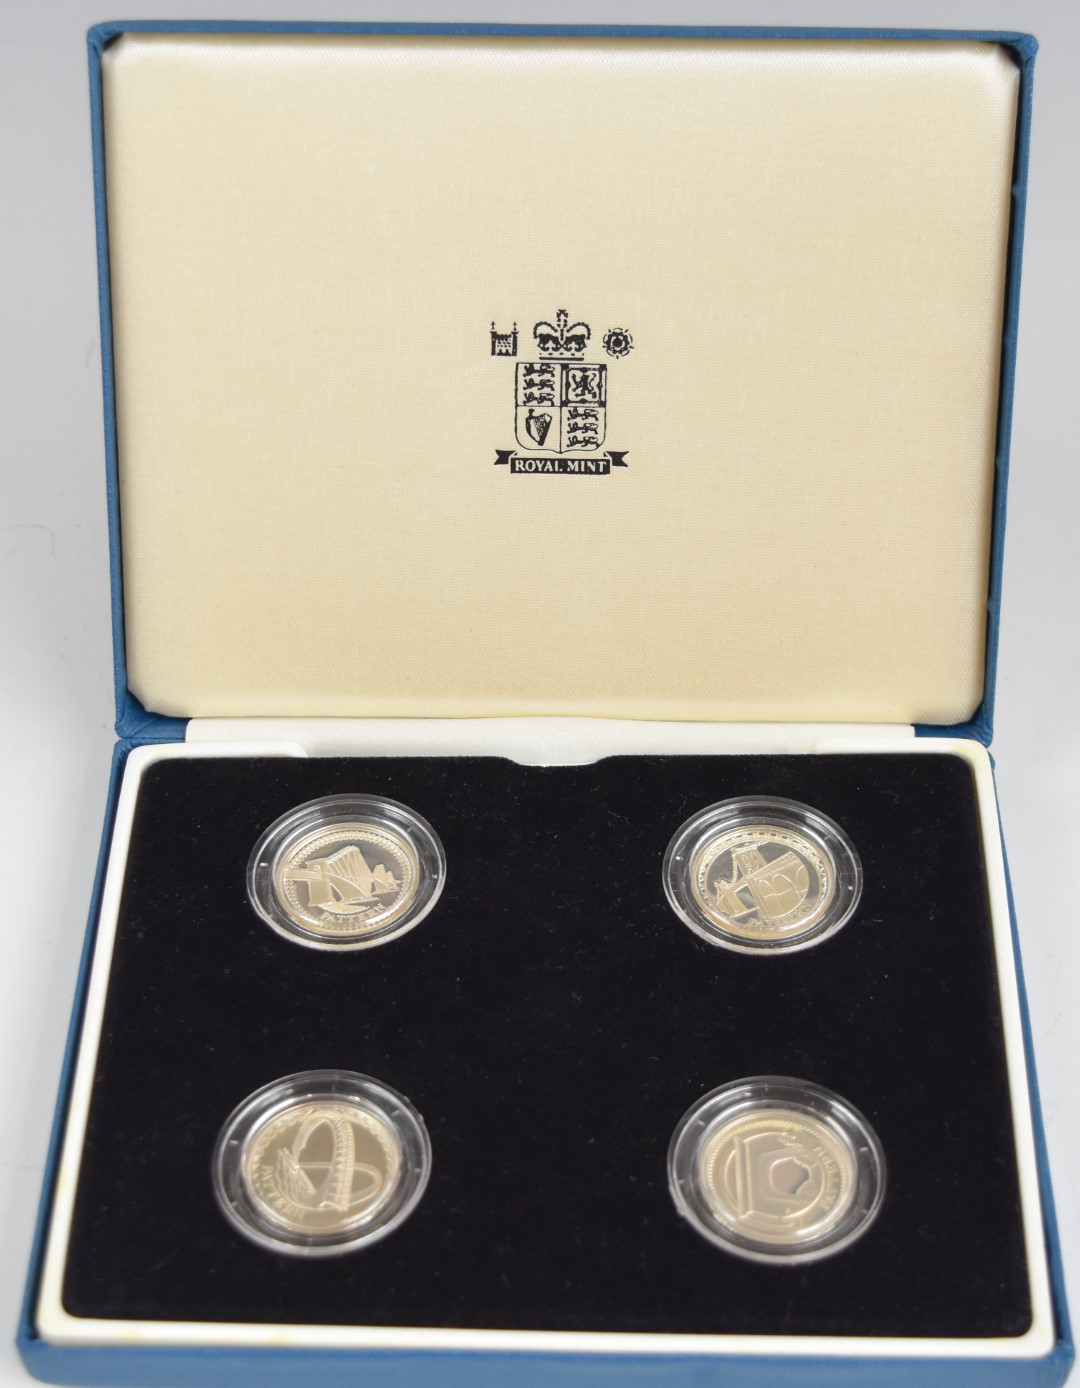 Royal Mint cased set of four silver proof 2003 £1 coins featuring bridges